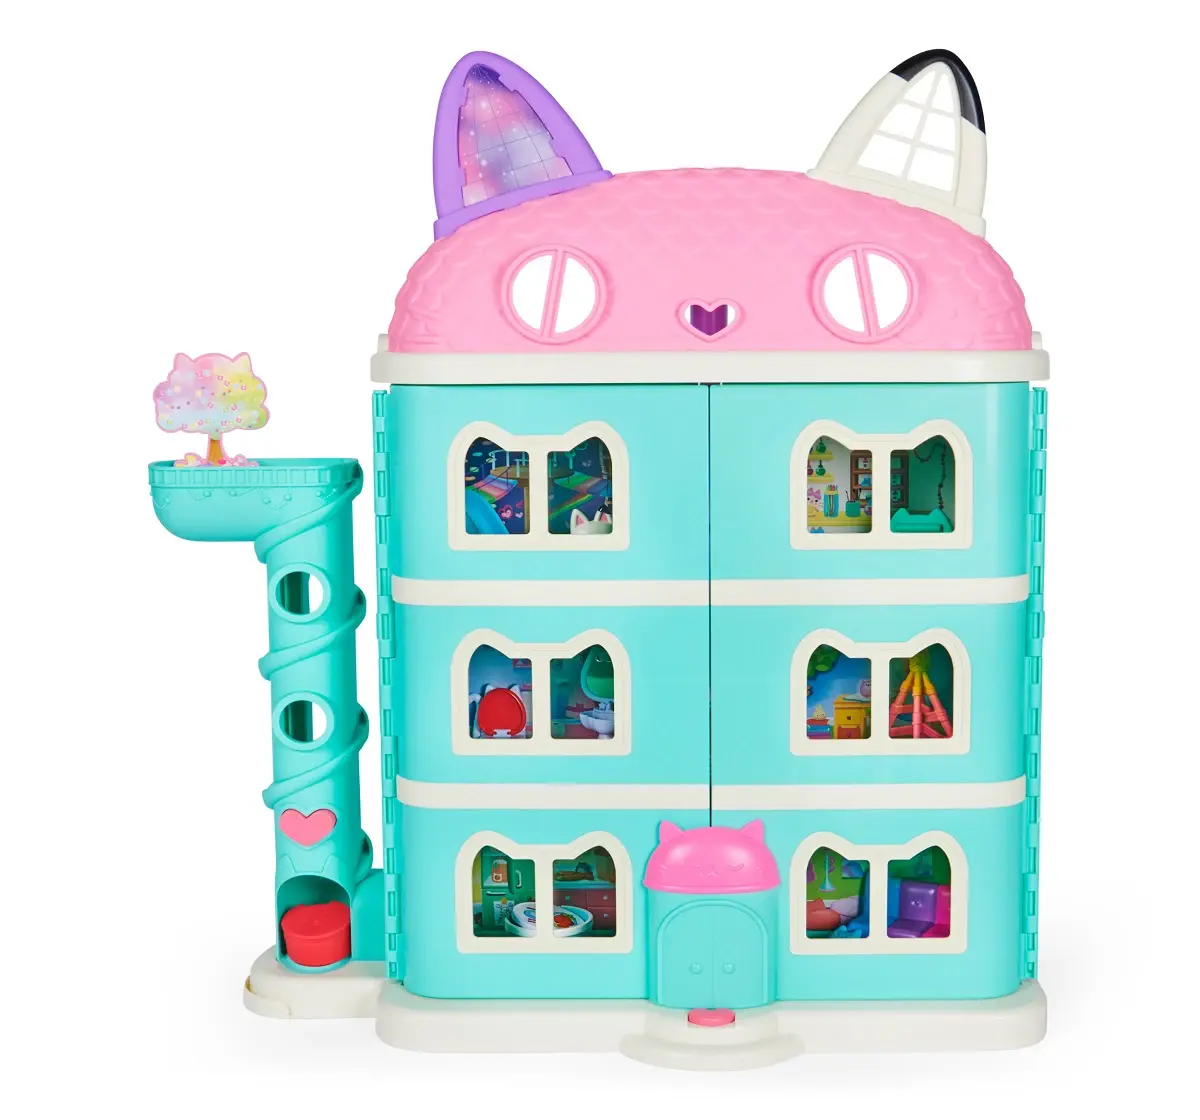 Gabby's Dollhouse, Purrfect Dollhouse with 15 Pieces including Toy Figures,  Furniture, Accessories and Sounds, Kids Toys for Ages 3 and up